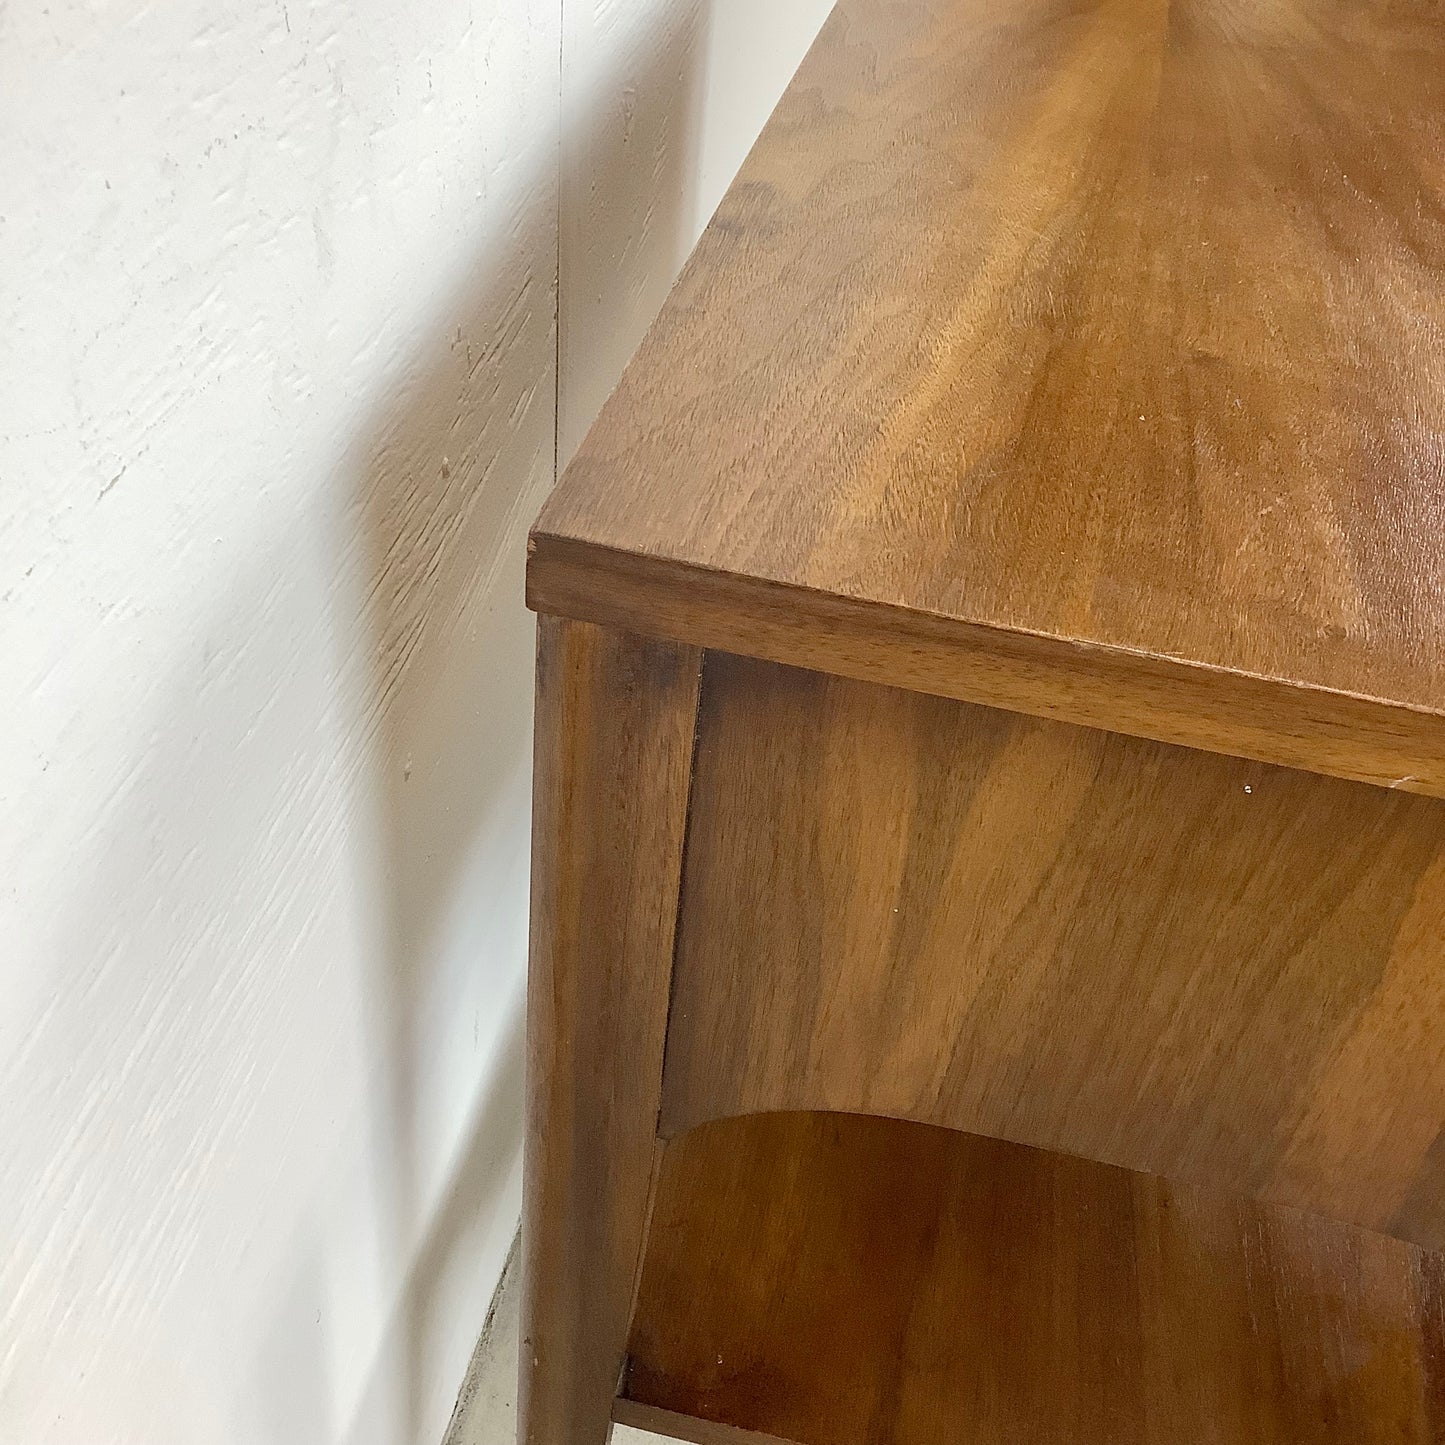 Mid-Century Perspecta Nightstand by Kent Coffey